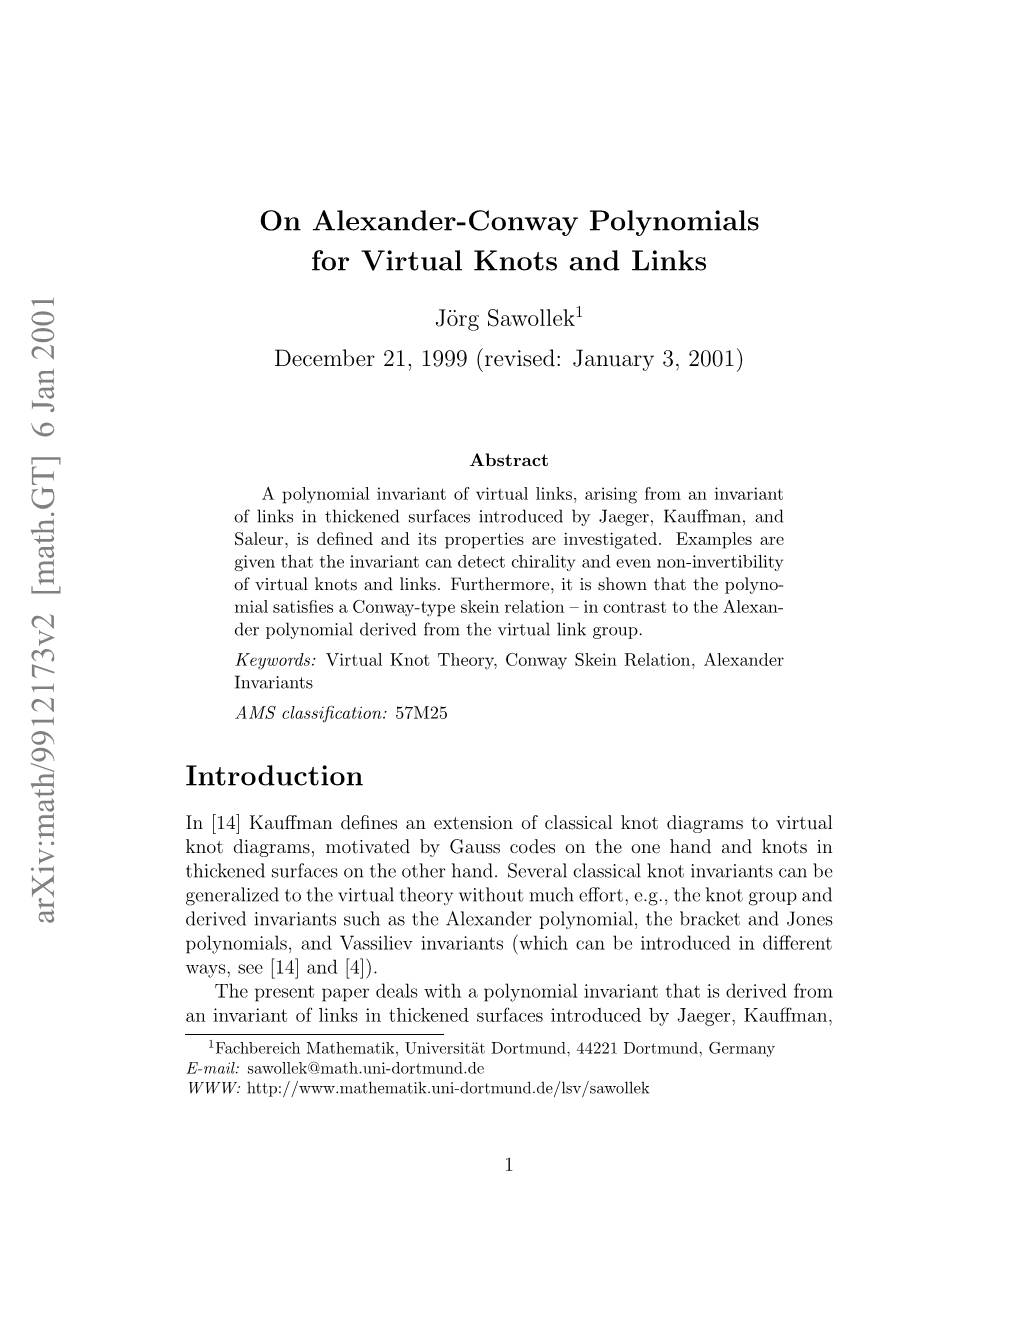 On Alexander-Conway Polynomials for Virtual Knots and Links